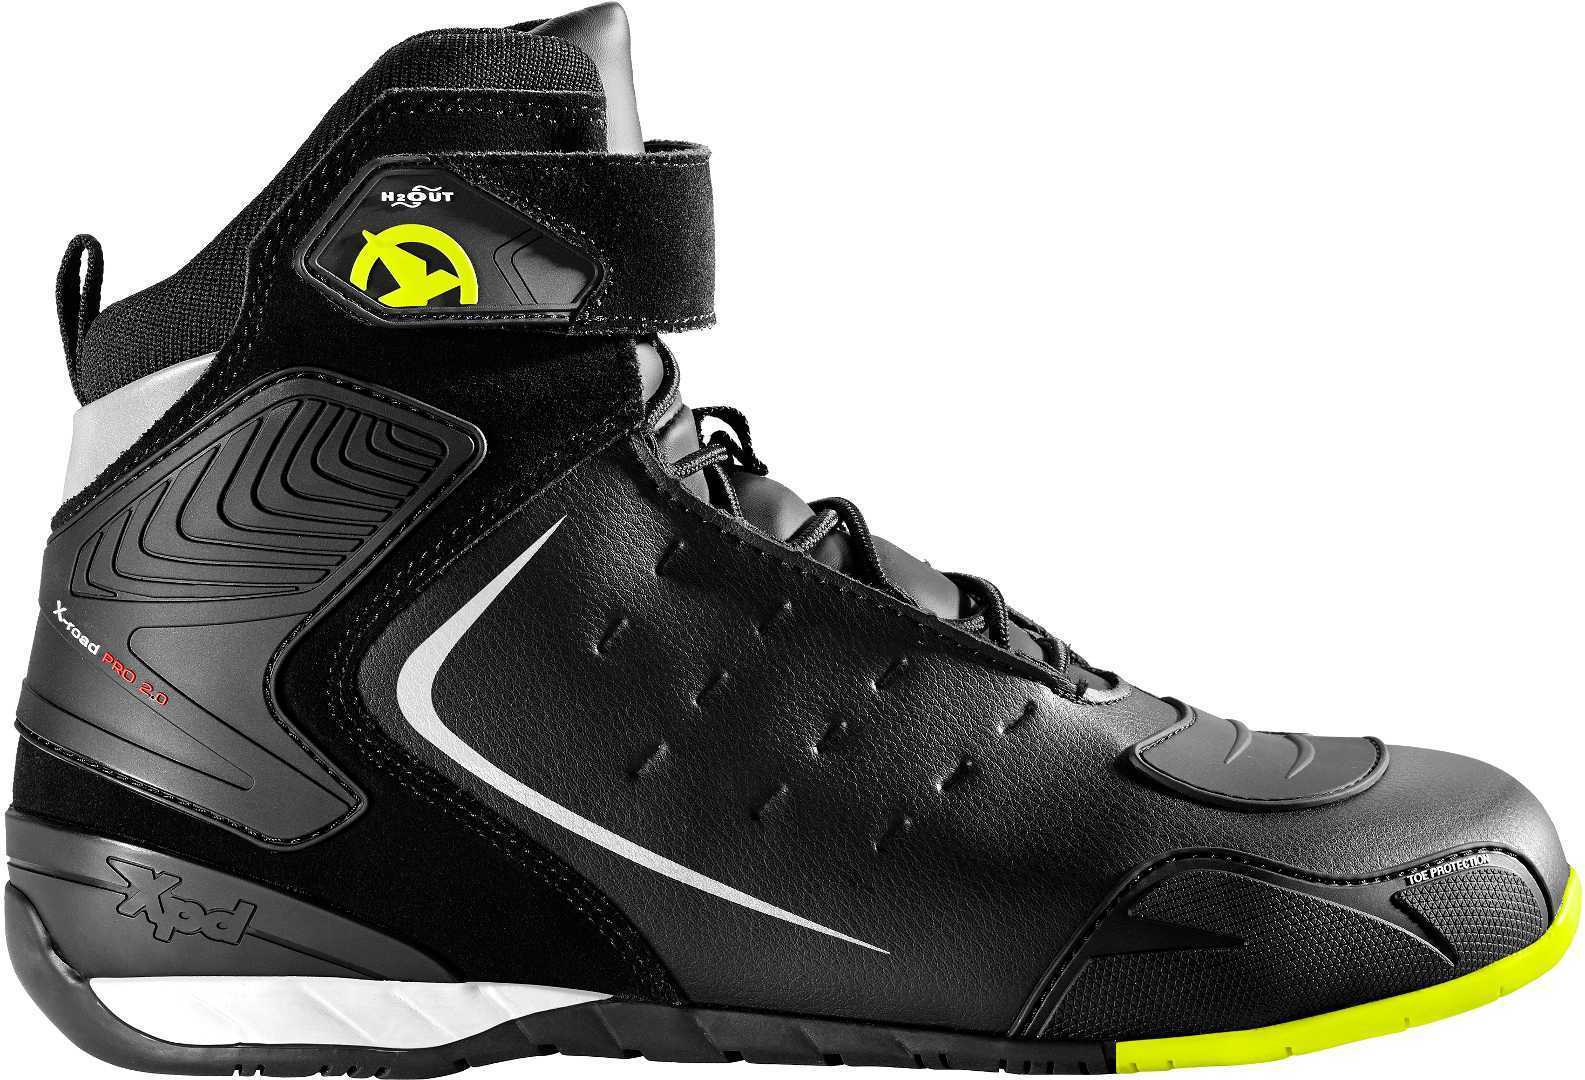 Image of XPD X-Road H2Out Yellow Fluo Size 48 EN